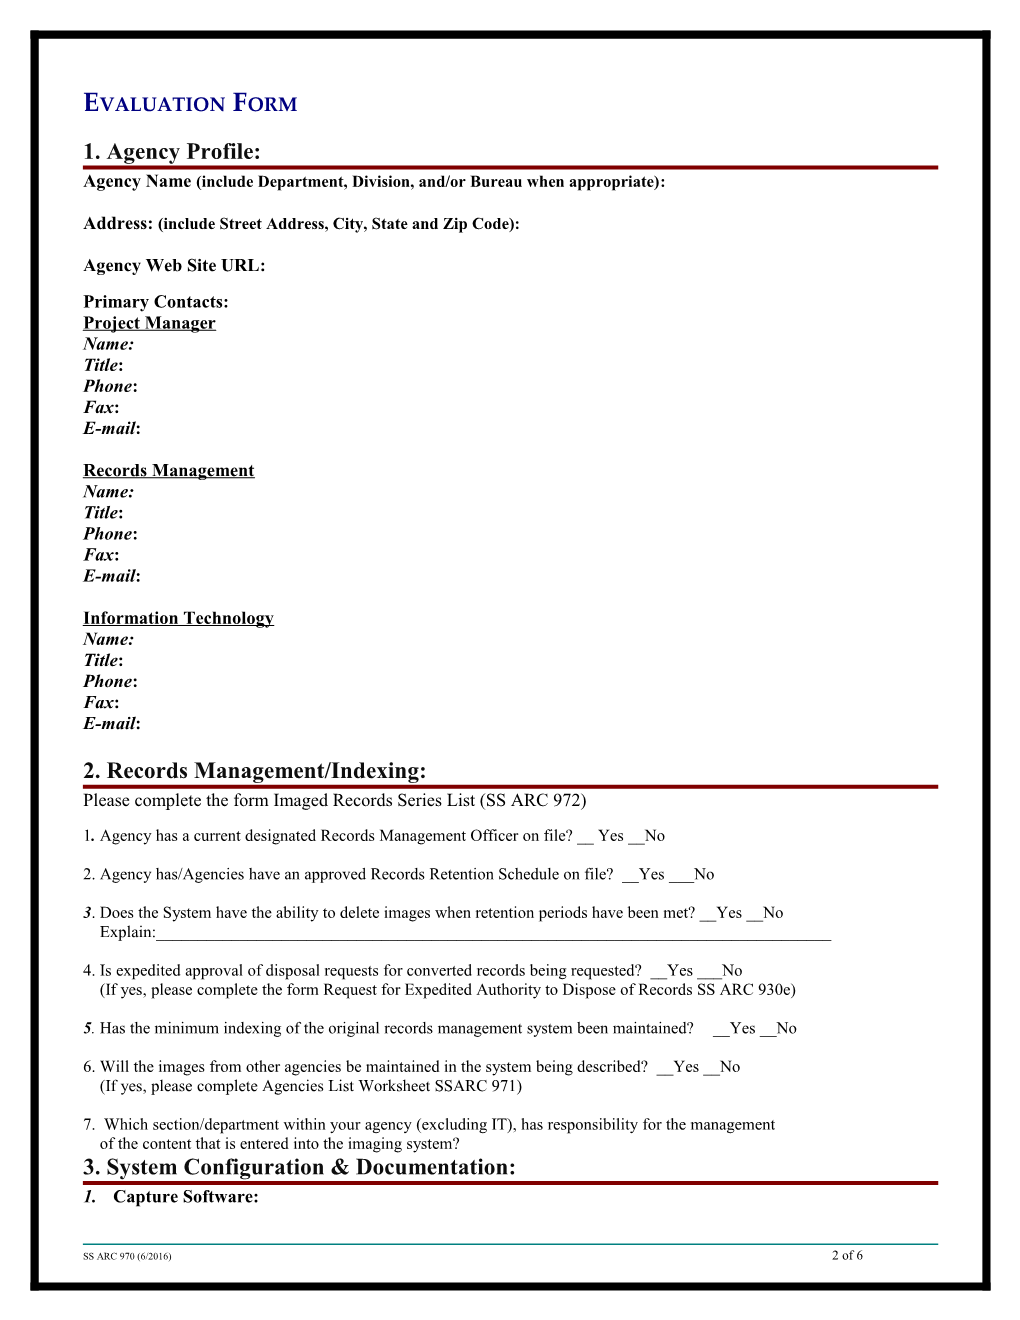 Imaging Exception Application and Evaluation Form